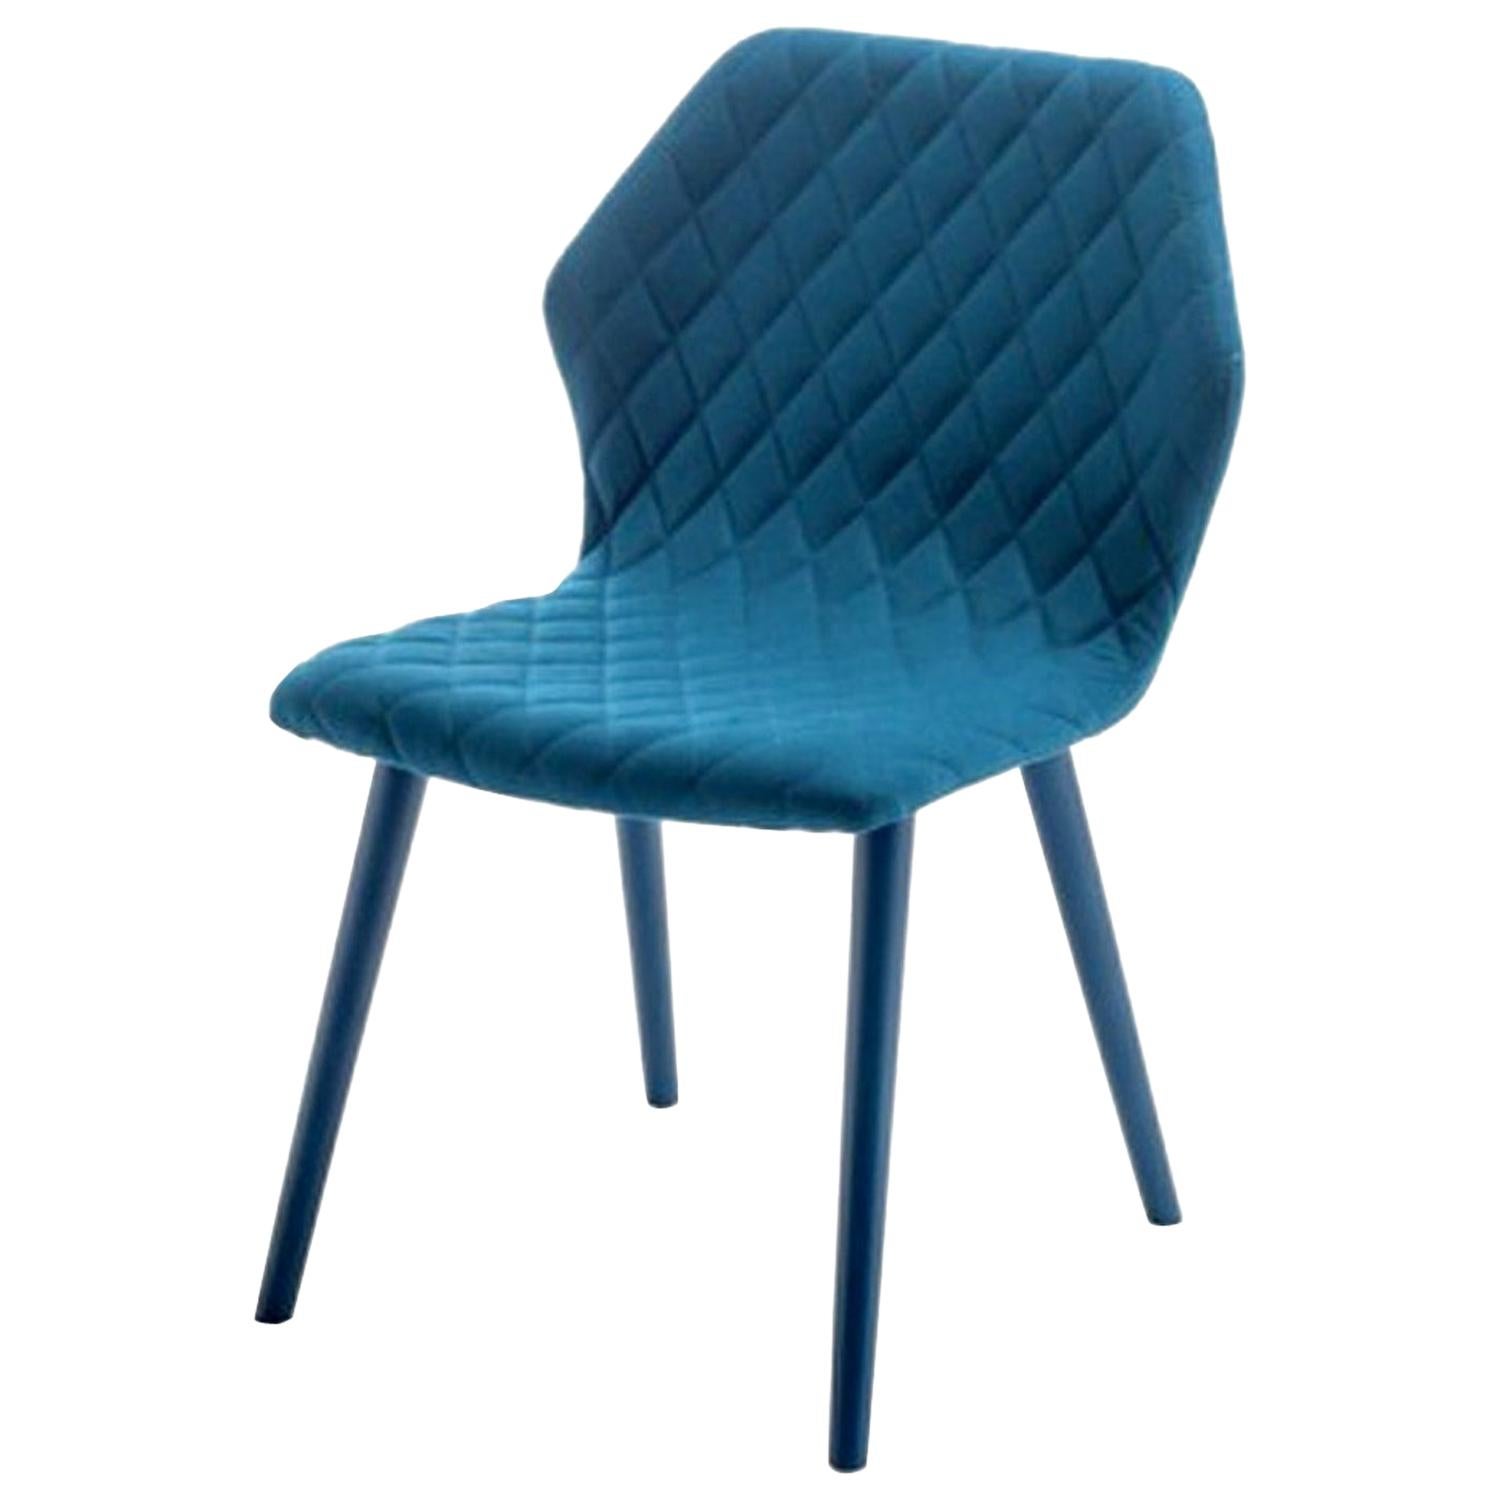 Ava Blue Leather Quilted Chair, Designed by Michael Schmidt, Made in Italy